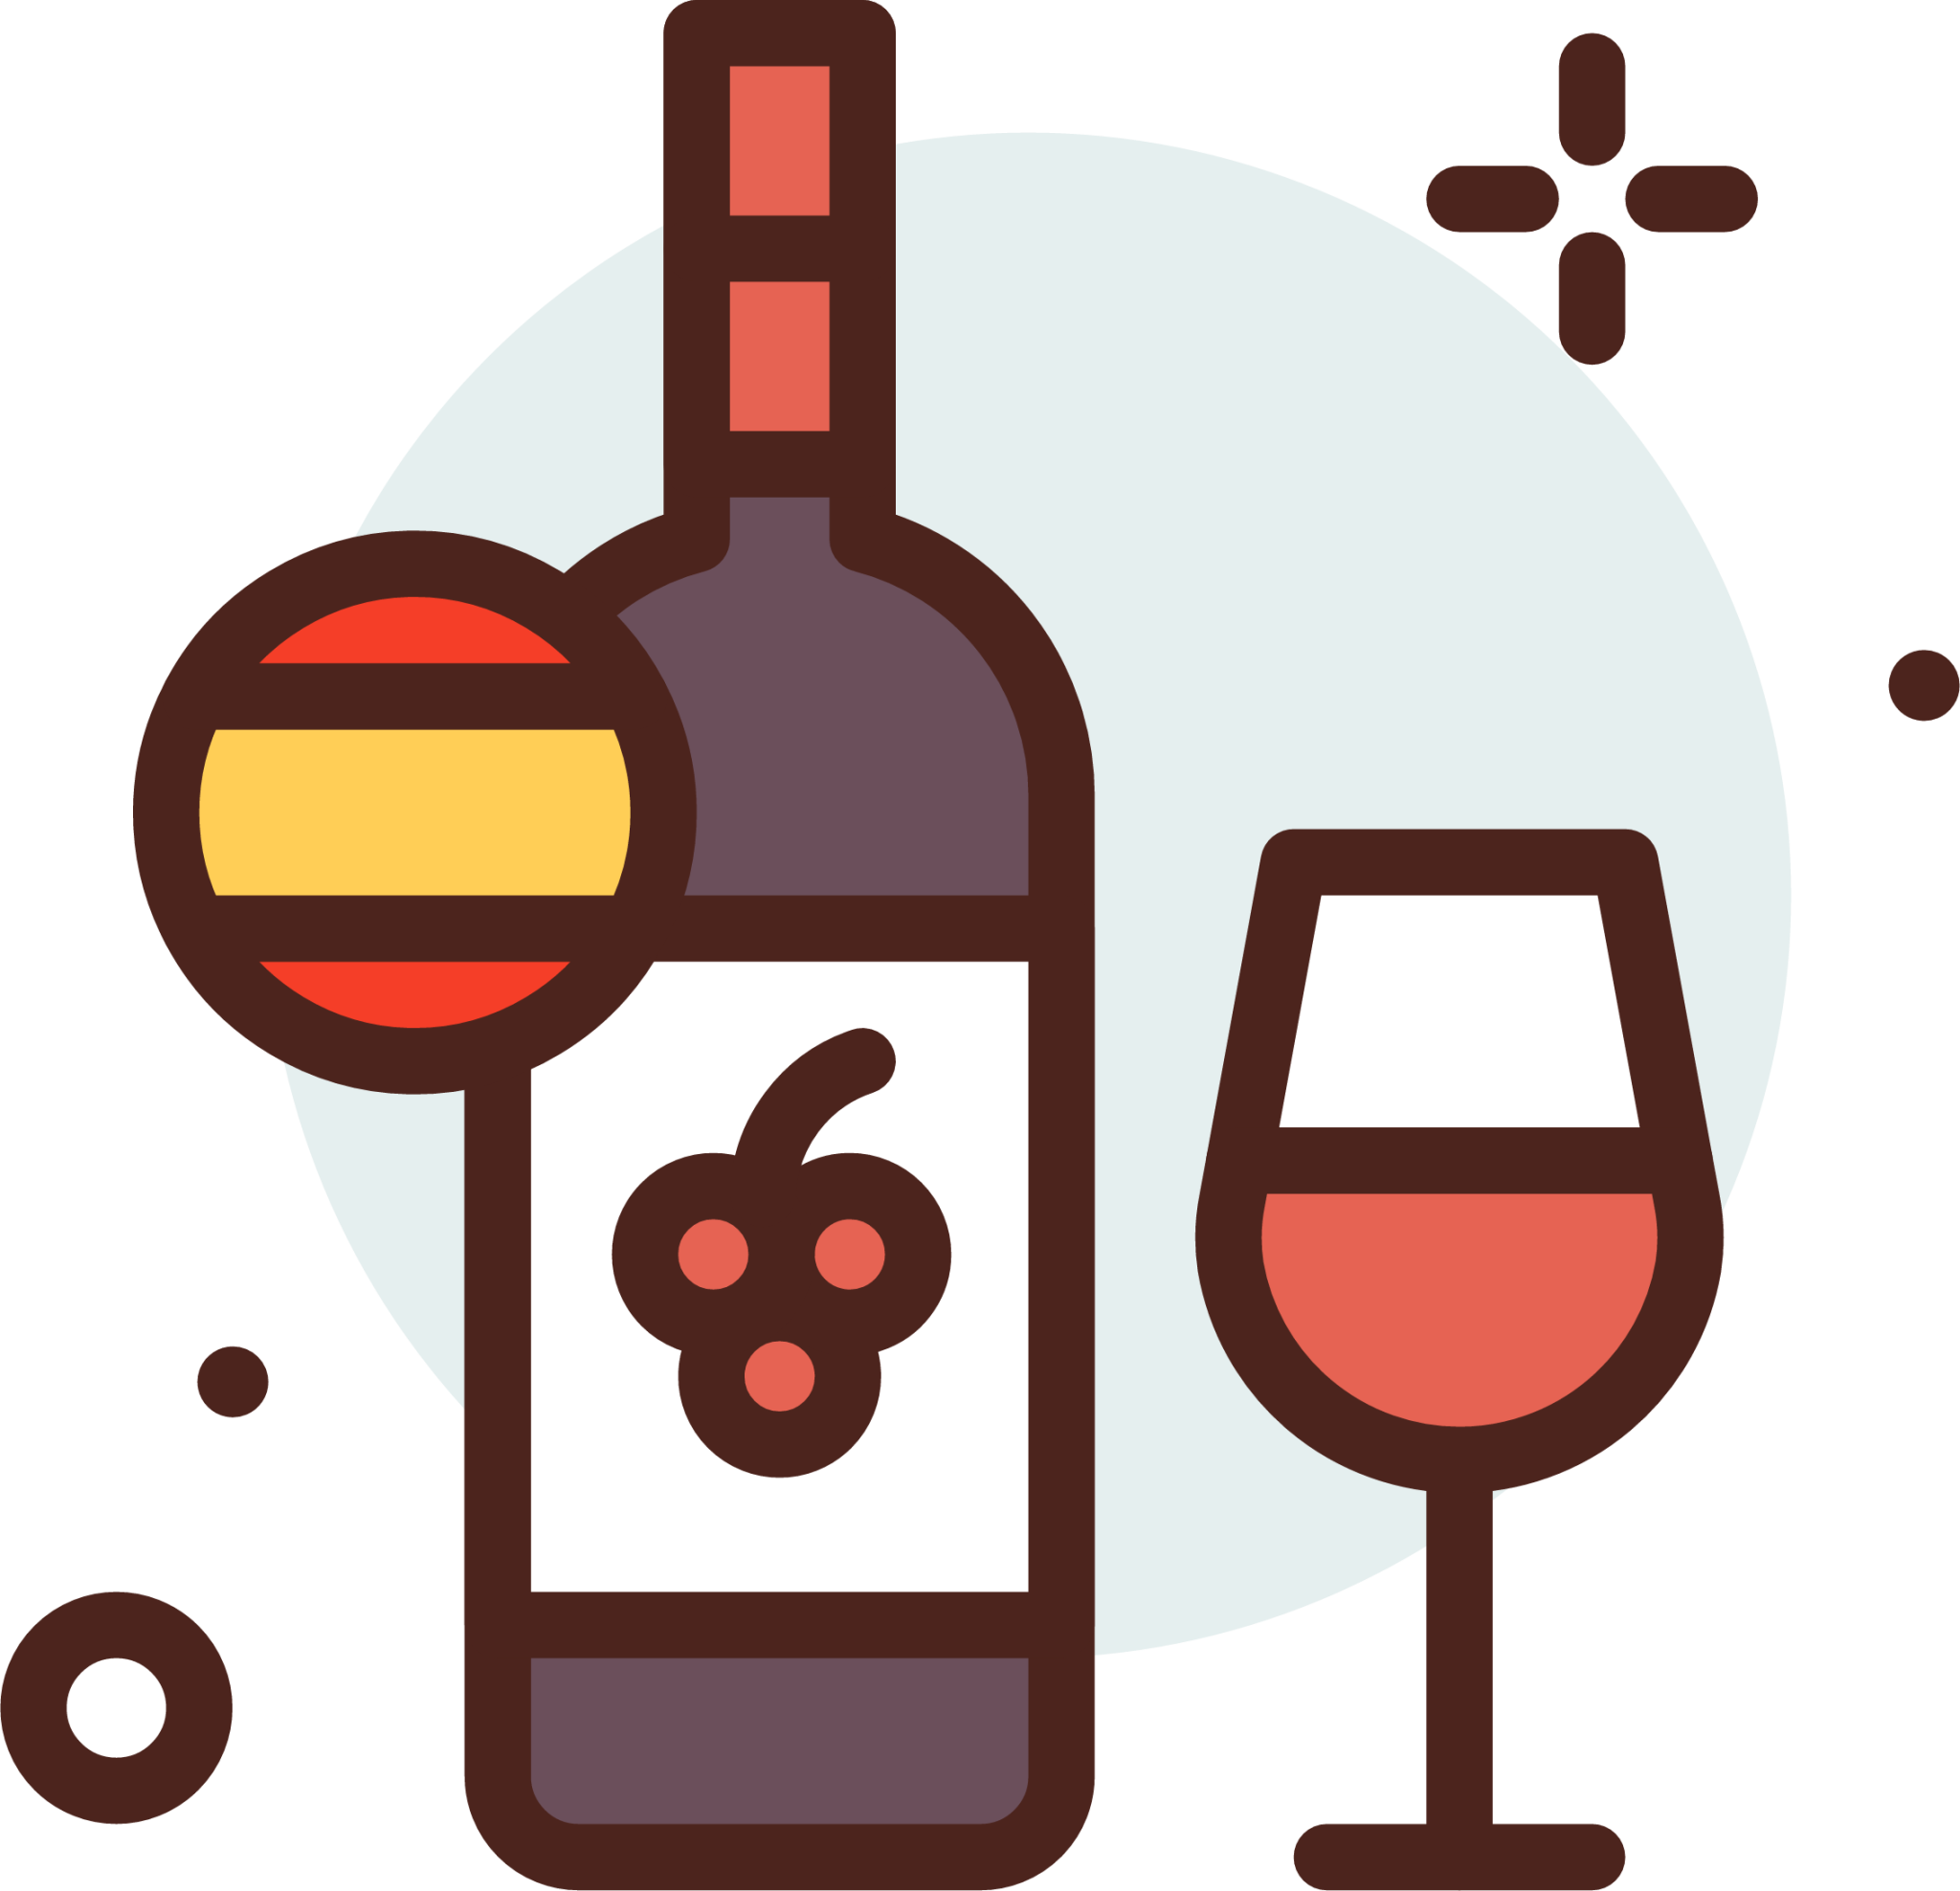 red wine png